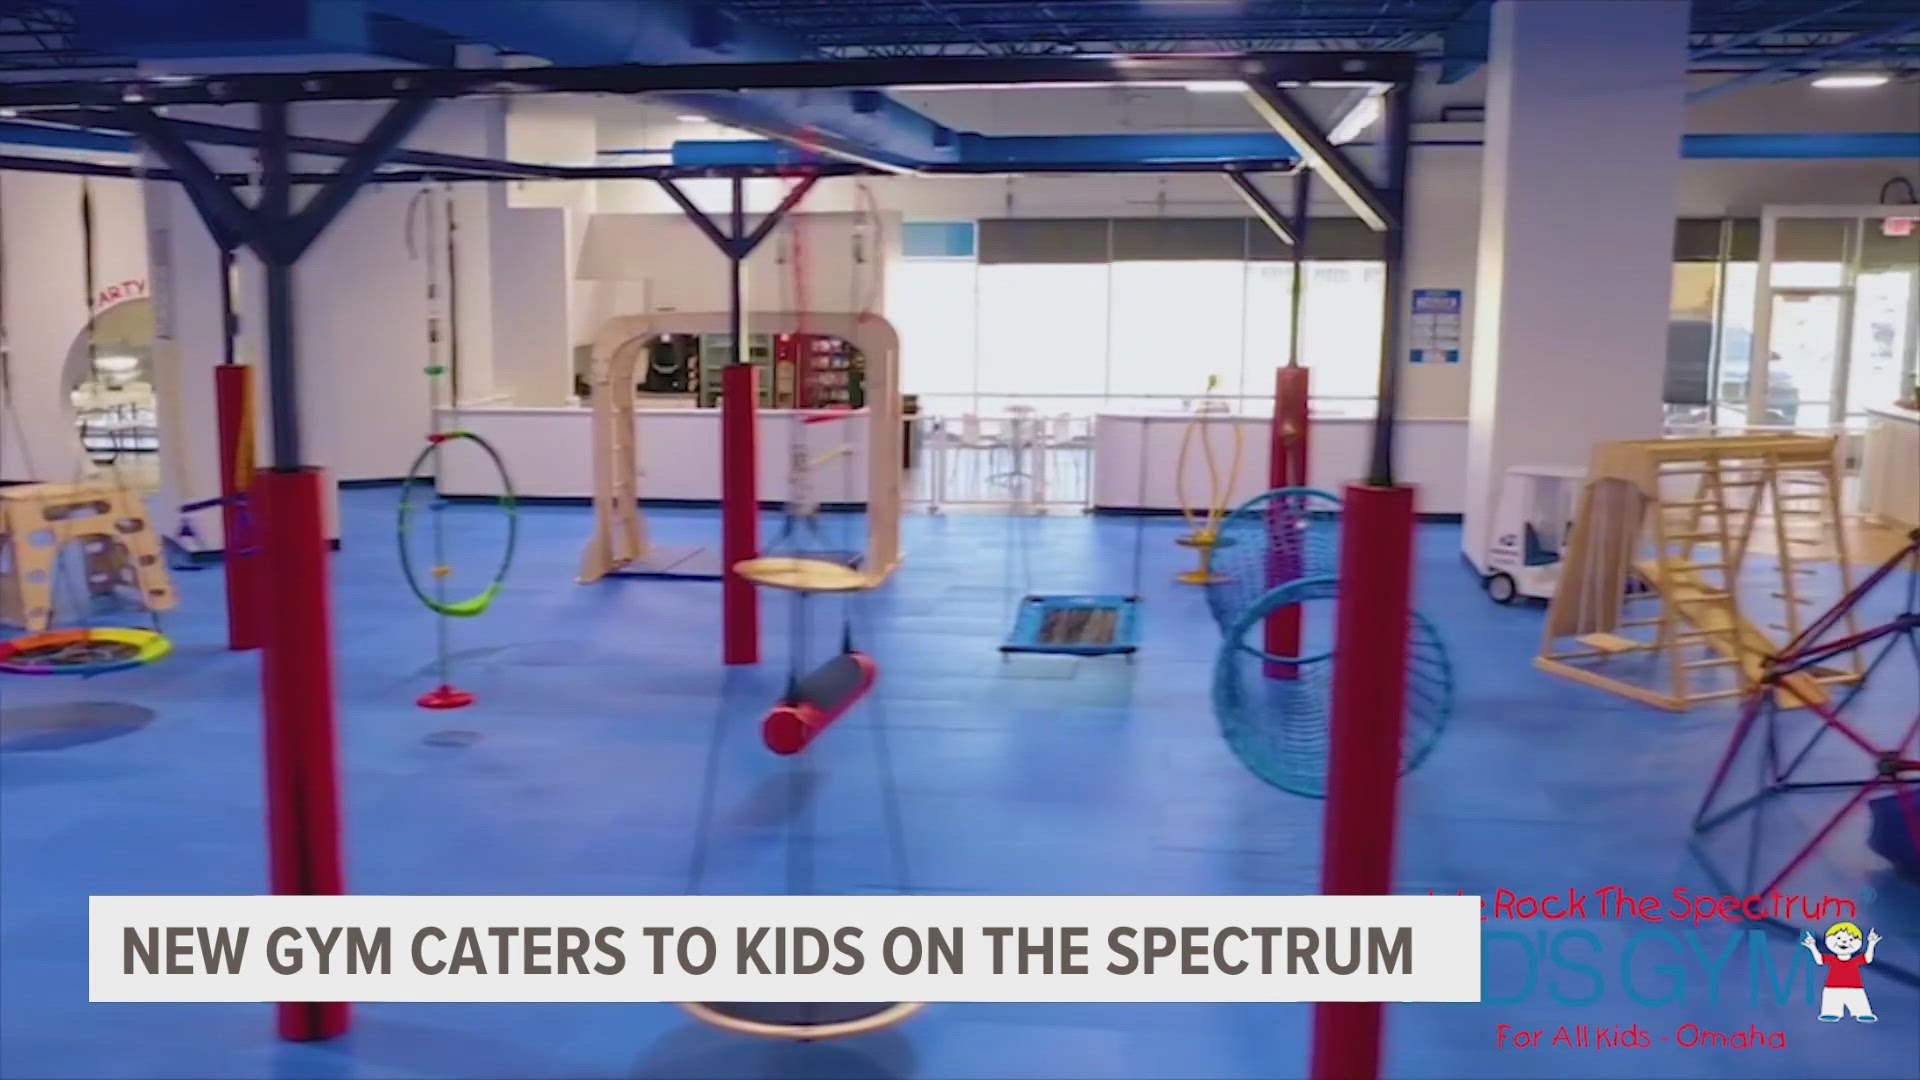 A gym that caters to children on the spectrum will soon have a location in West Michigan thanks to a local mom.